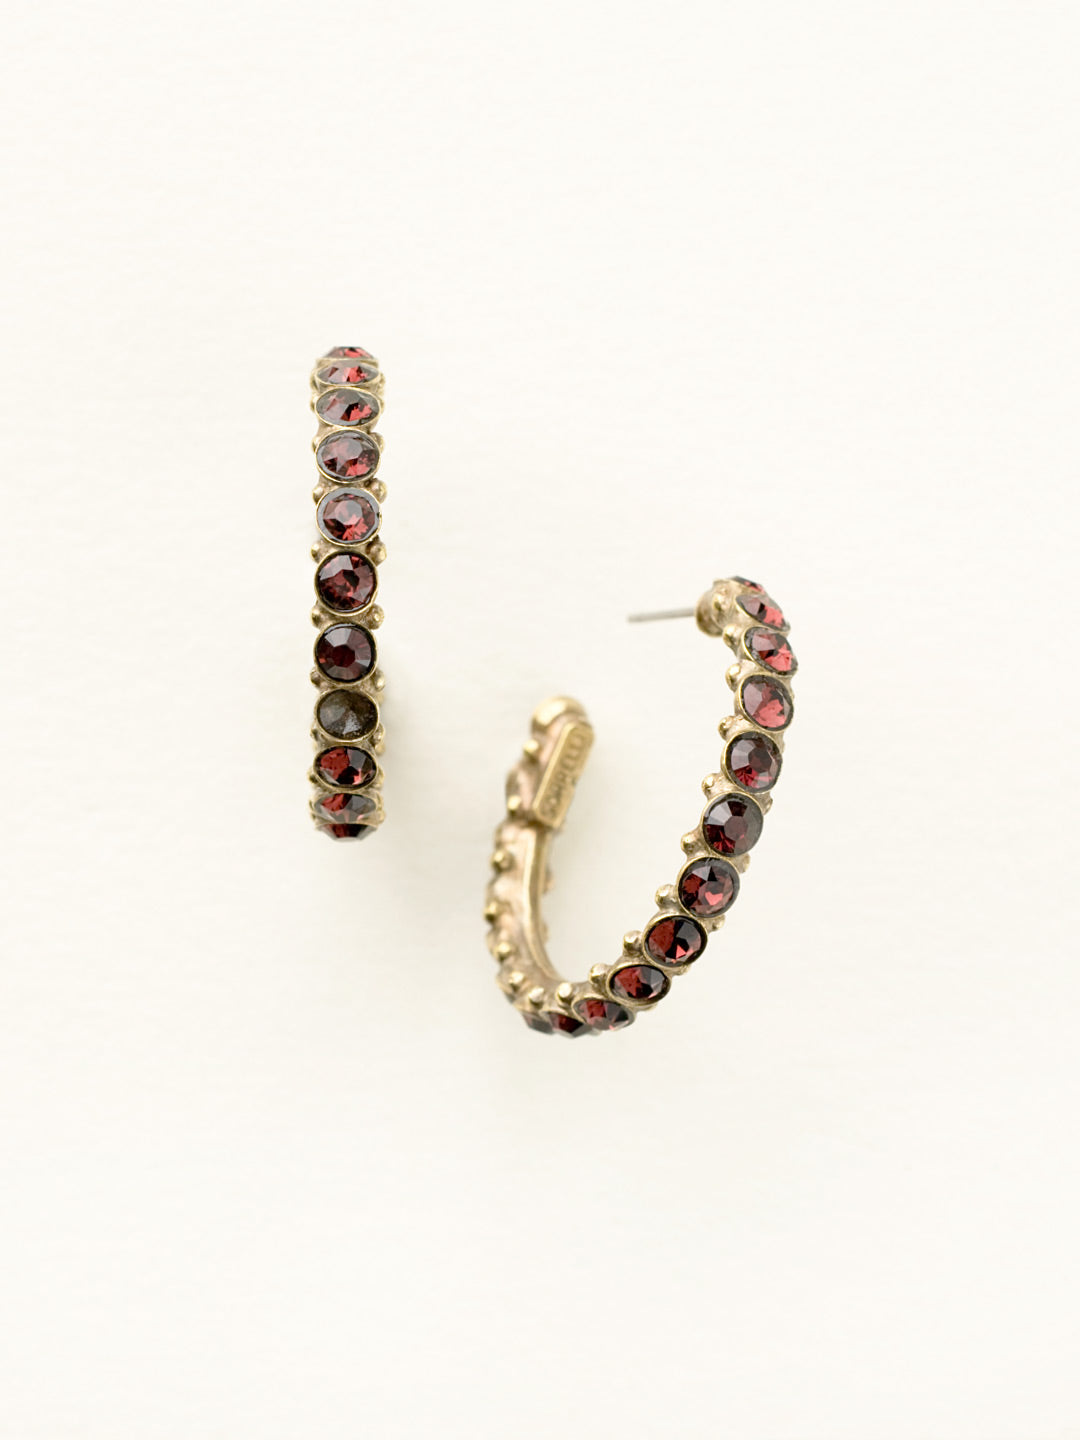 Heavenly Hoop Earrings - ECQ24AGSAN - <p>Gemstones cover the outside of these hoop earrings. Their simple style combined with the sparkle of the jewels makes it the perfect staple piece for your jewelry box. From Sorrelli's Sangria collection in our Antique Gold-tone finish.</p>